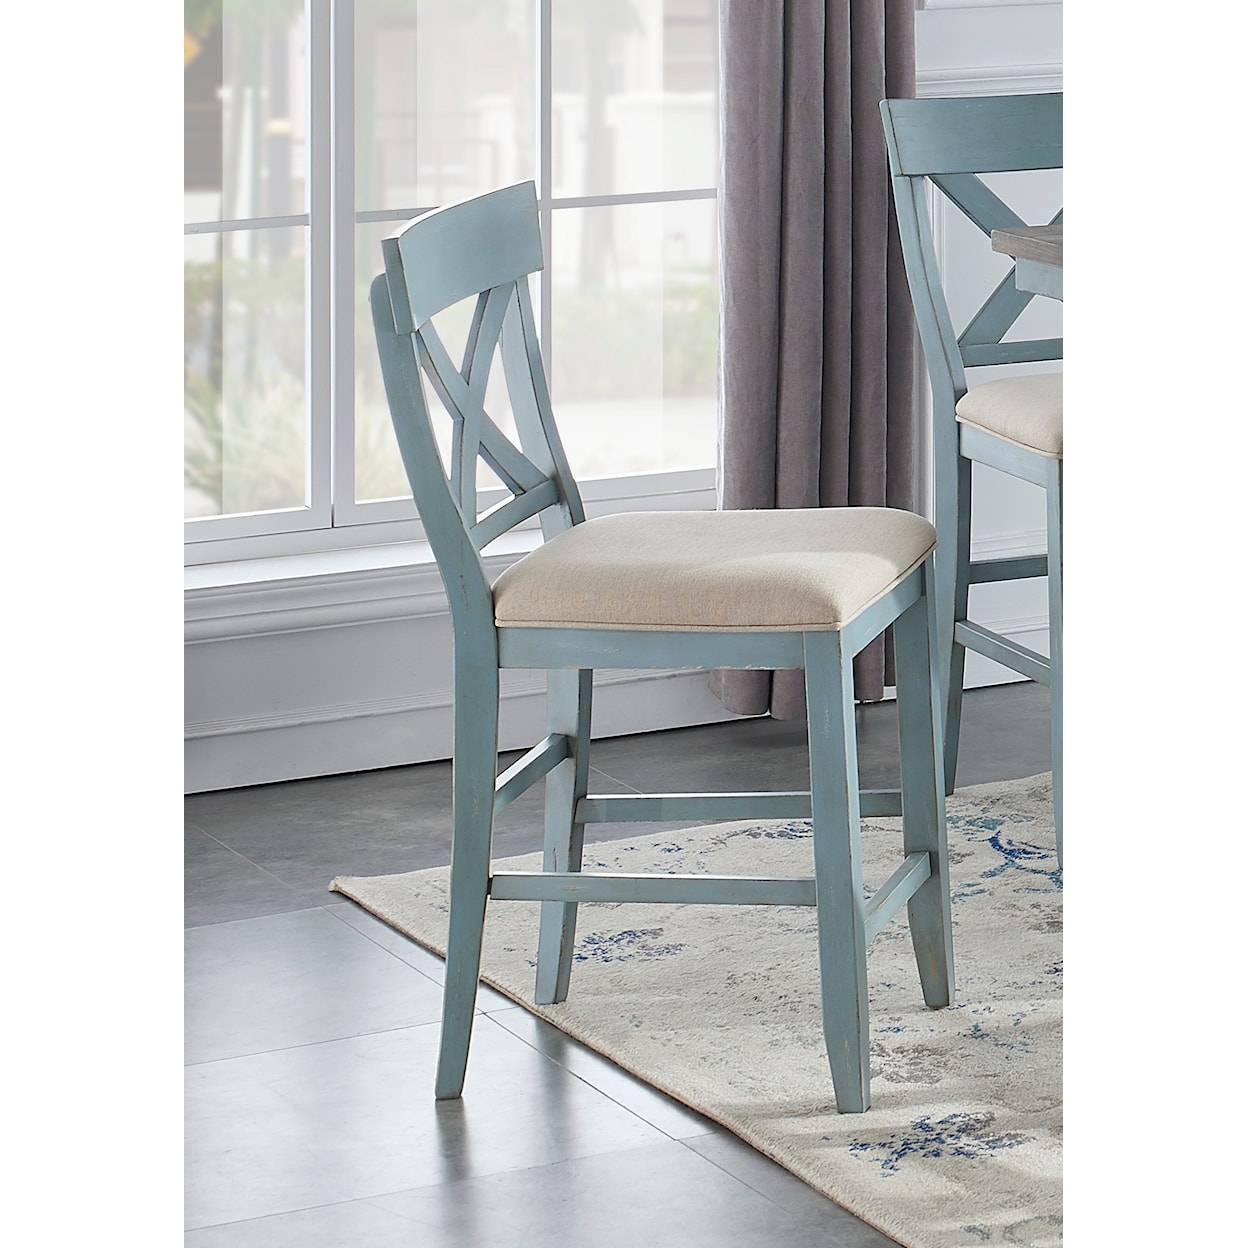 Carolina Accent Bar Harbor Counter-Height Dining Chair